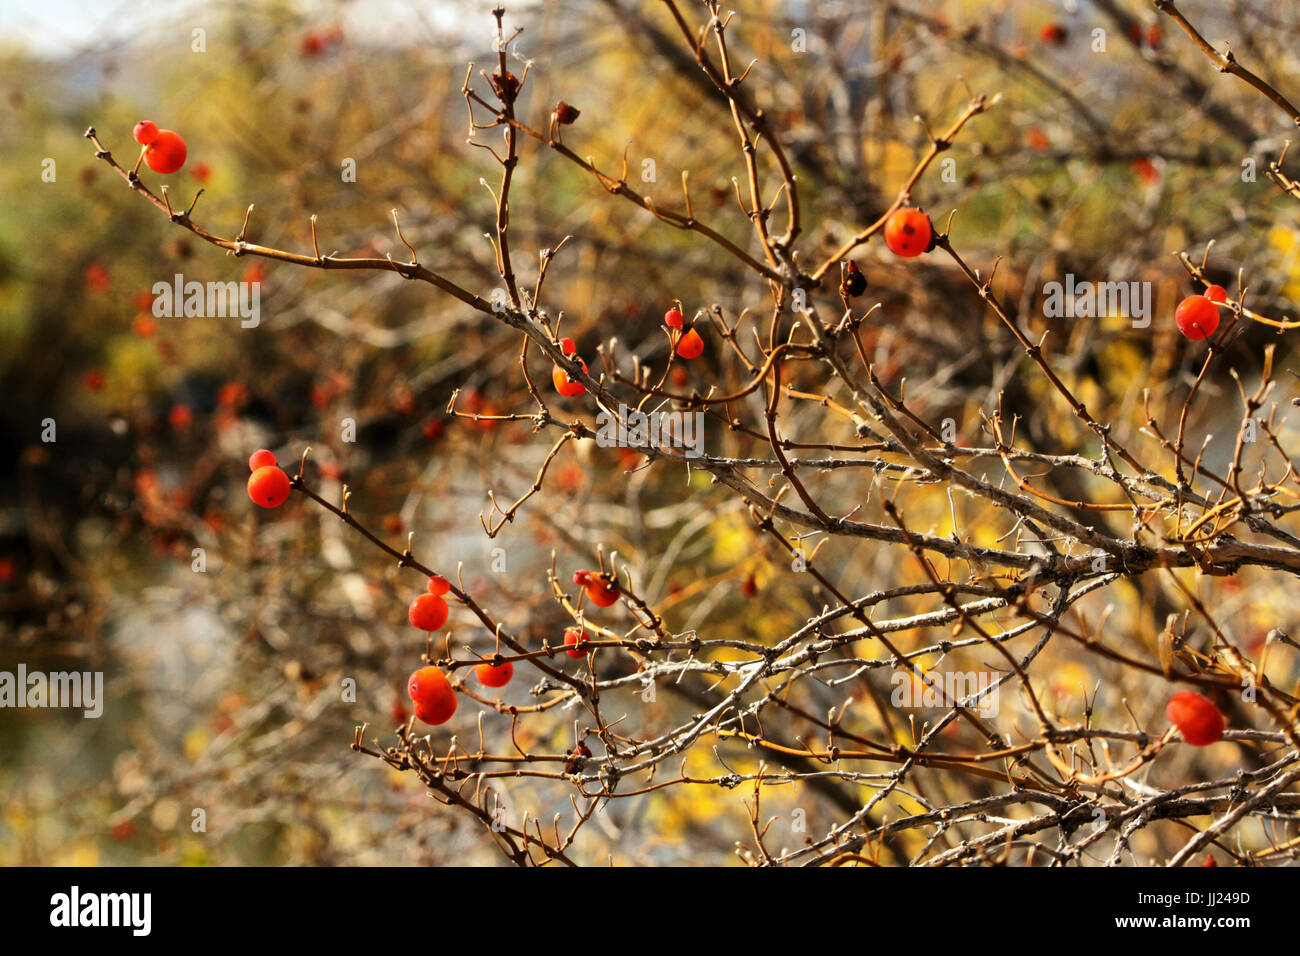 A winterberry shrub in winter with no leaves and a few red berries with a blurred bokeh background. Stock Photo